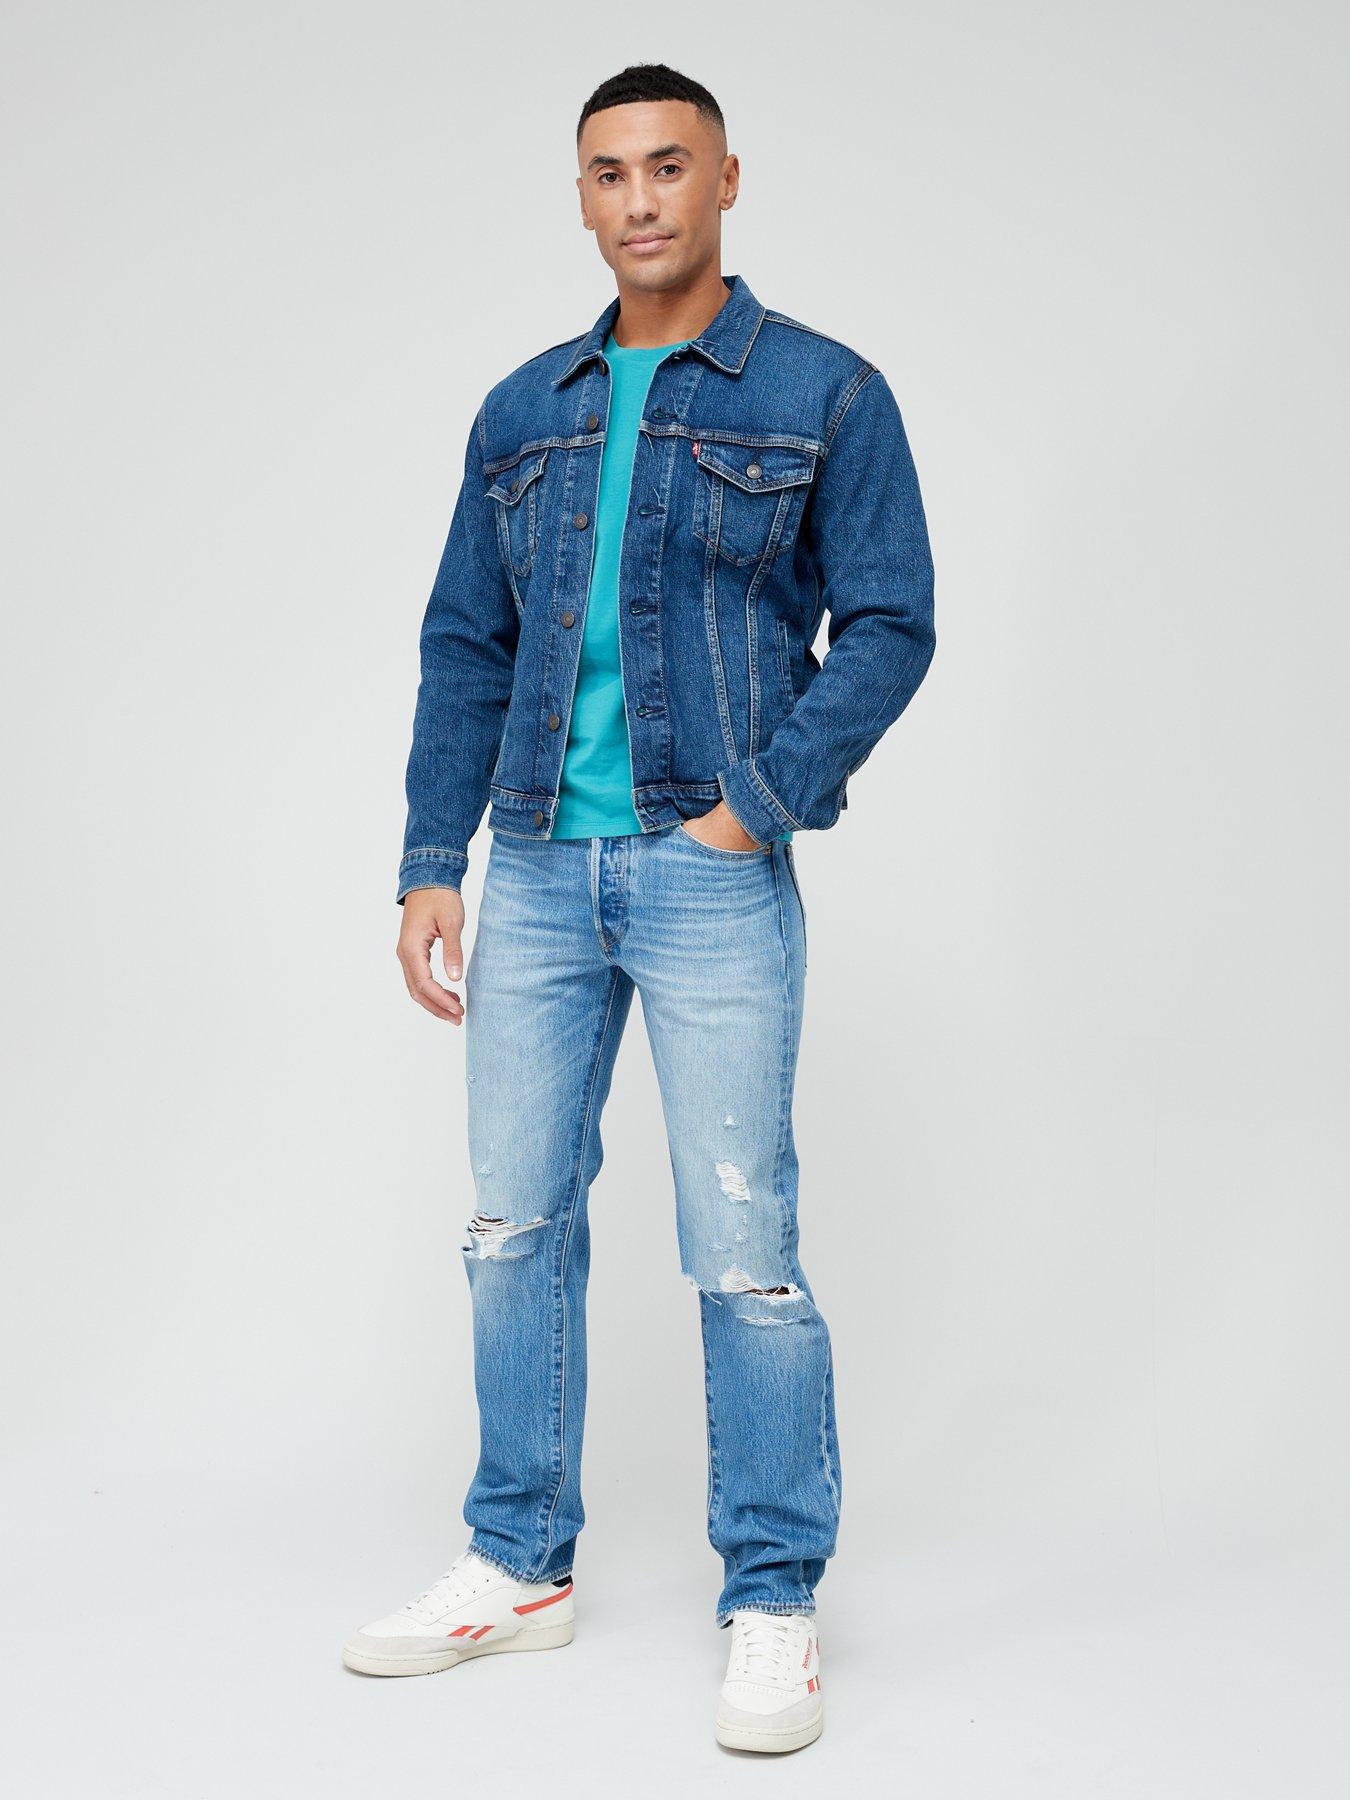 Levi's 501® Original Straight Fit Ripped Jeans - Light Wash 